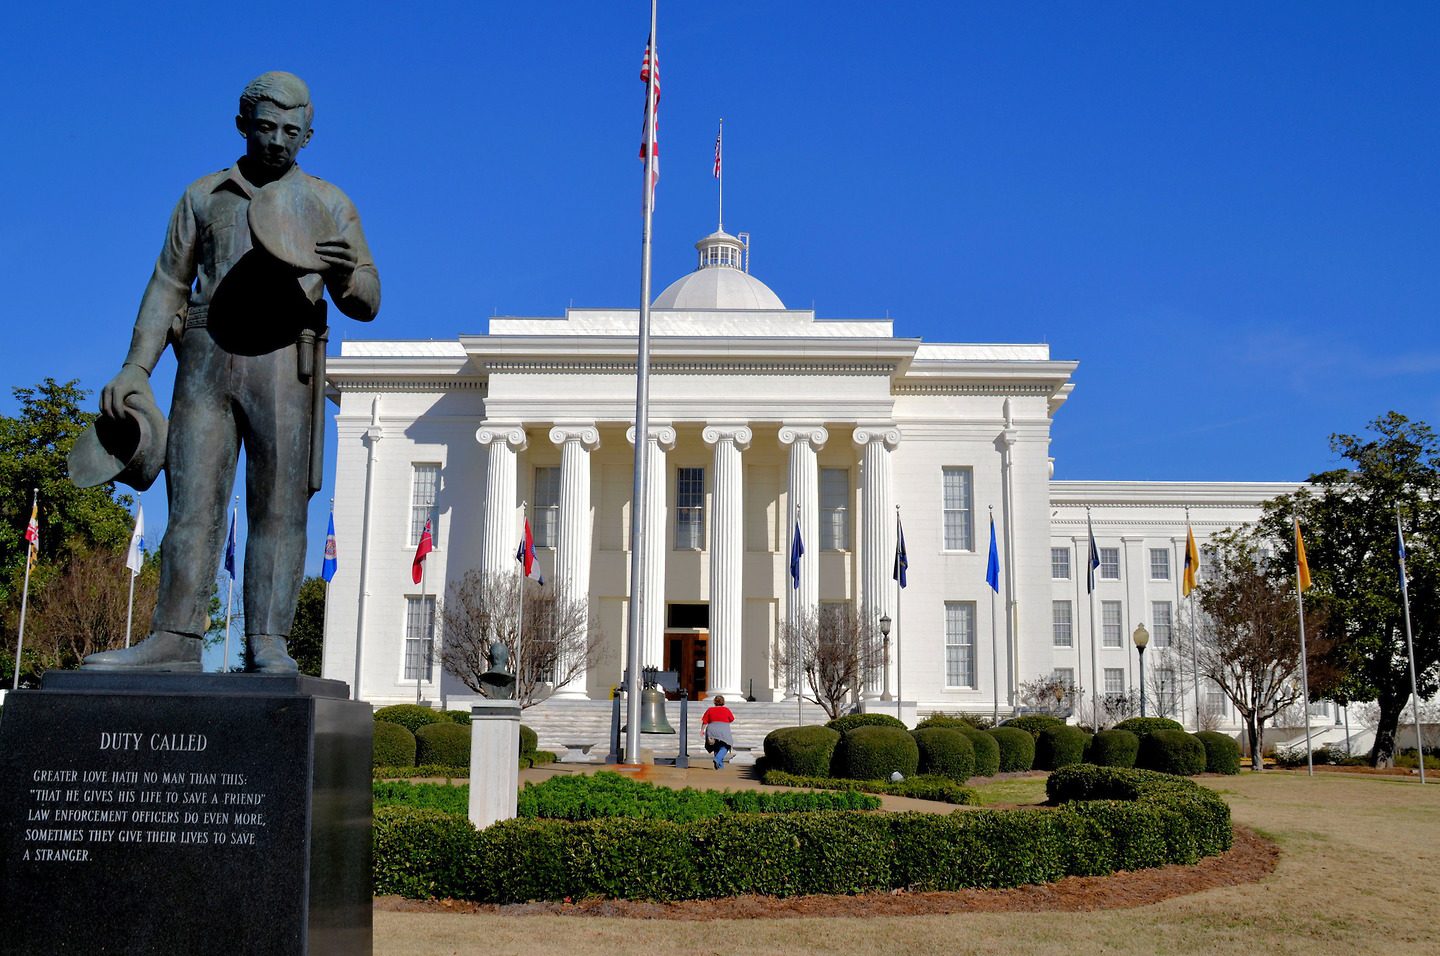 For over 150 years, the Alabama State Capital has stood watch over the City of Montgomery from its hilltop setting. 